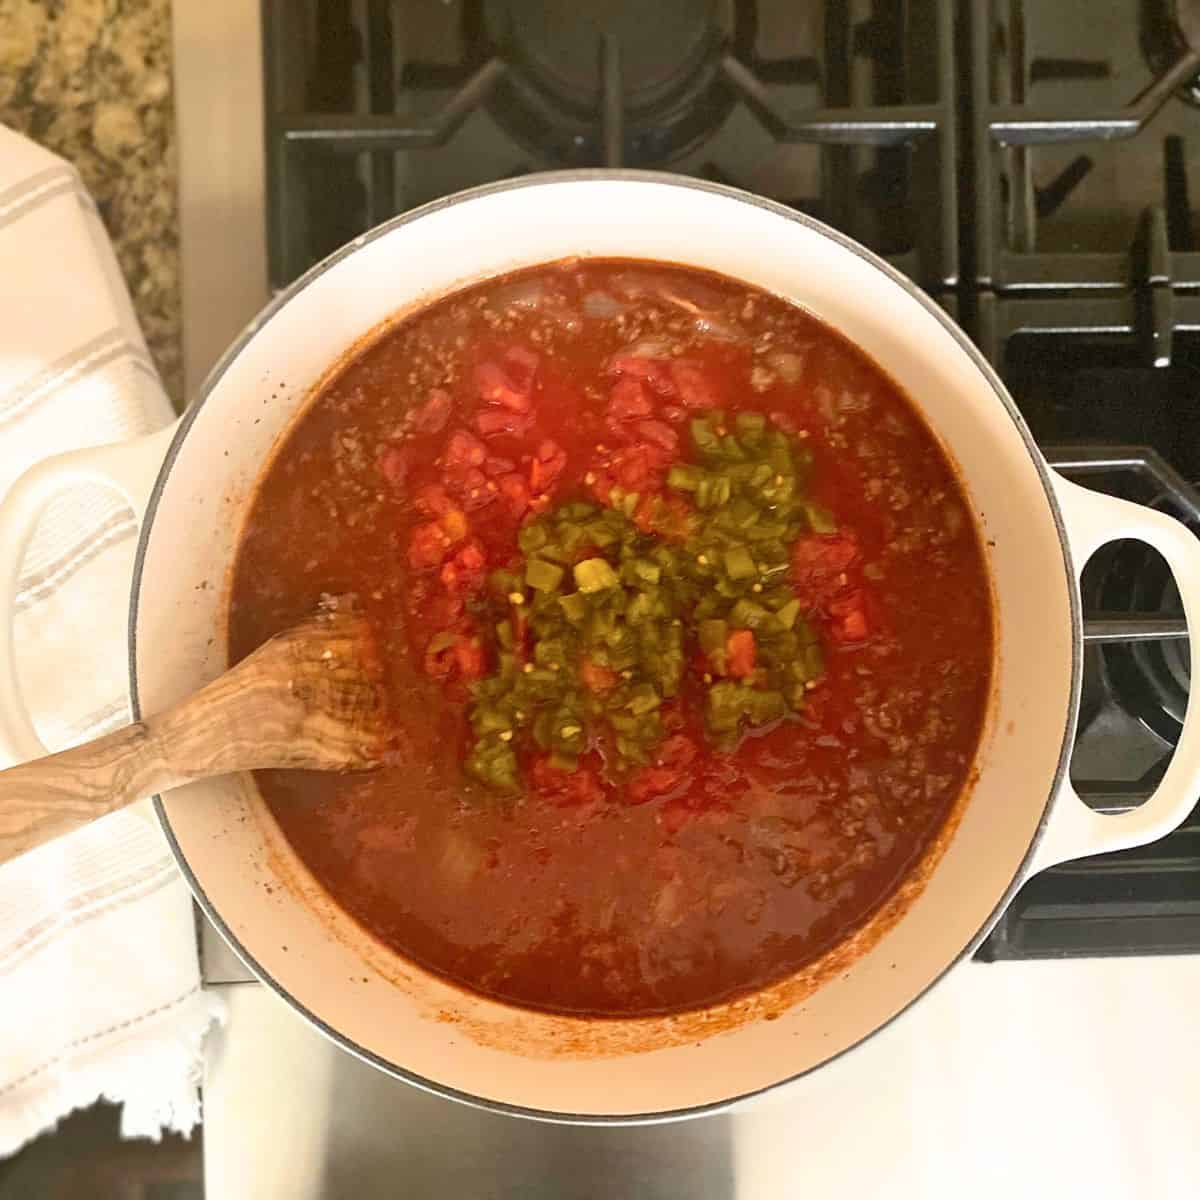 Added green chiles and diced tomatoes to chili on stove